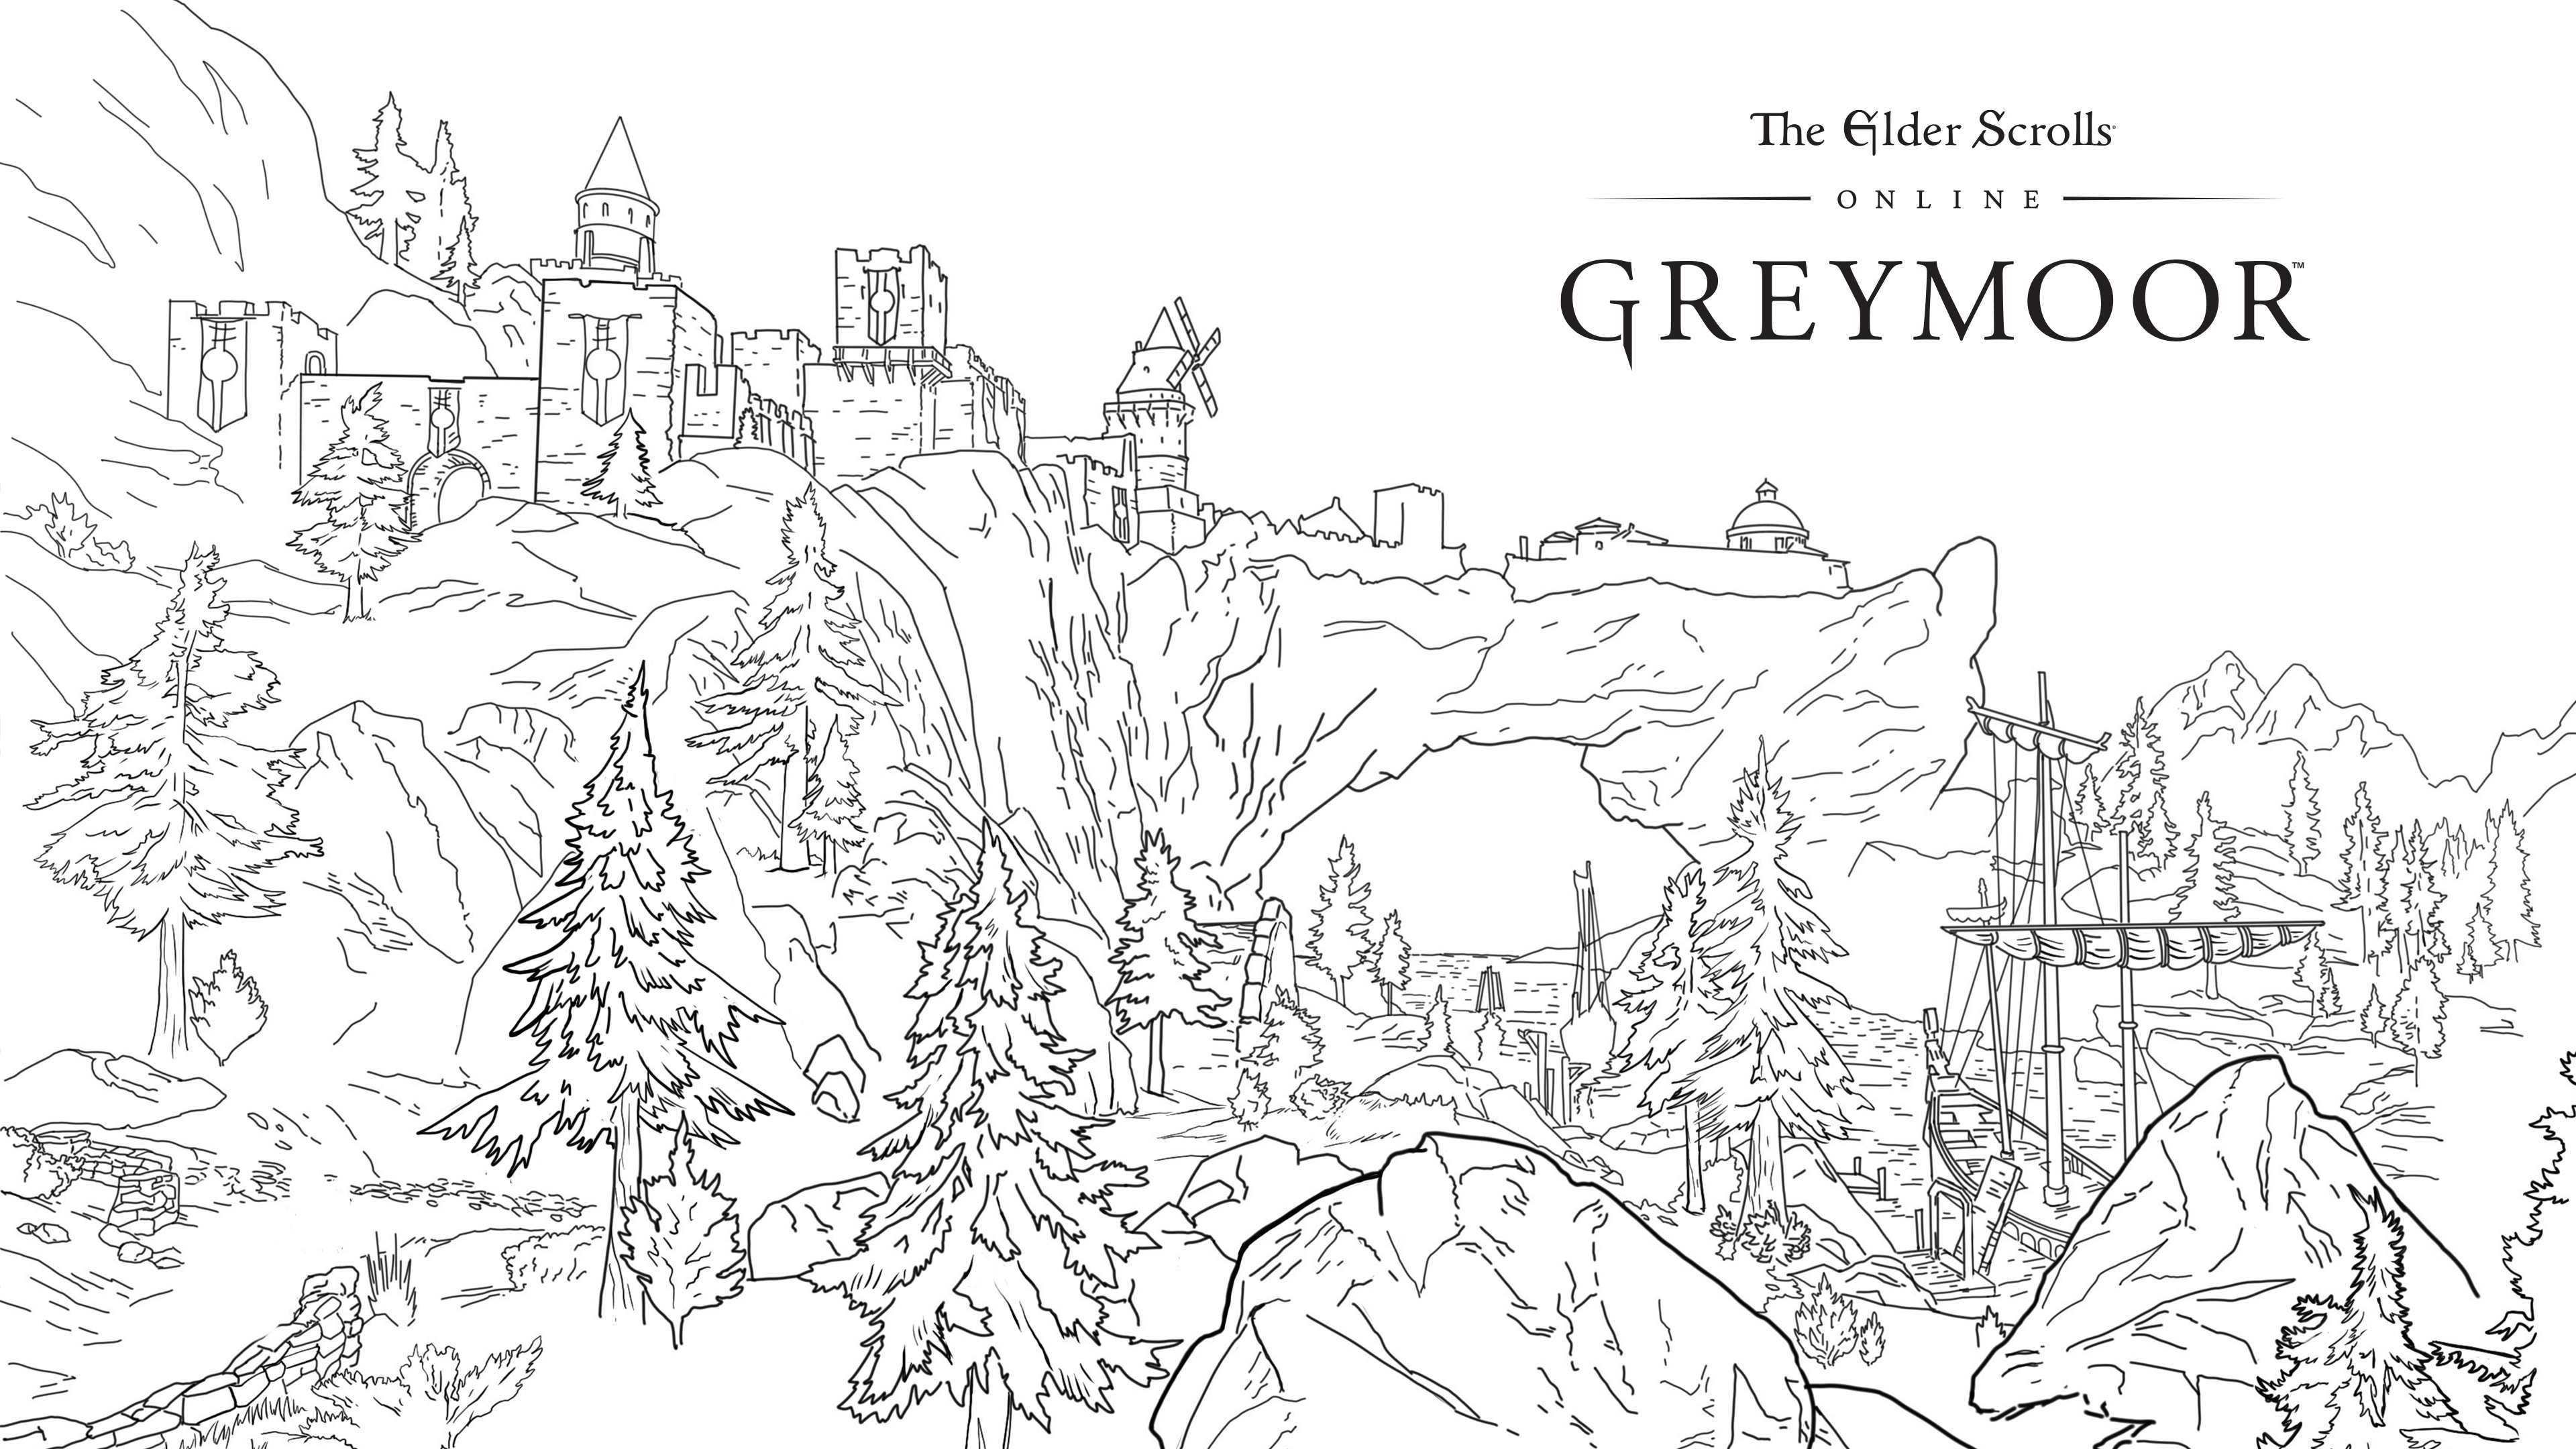 Get Creative at Home with these Greymoor Coloring Pages   The ...